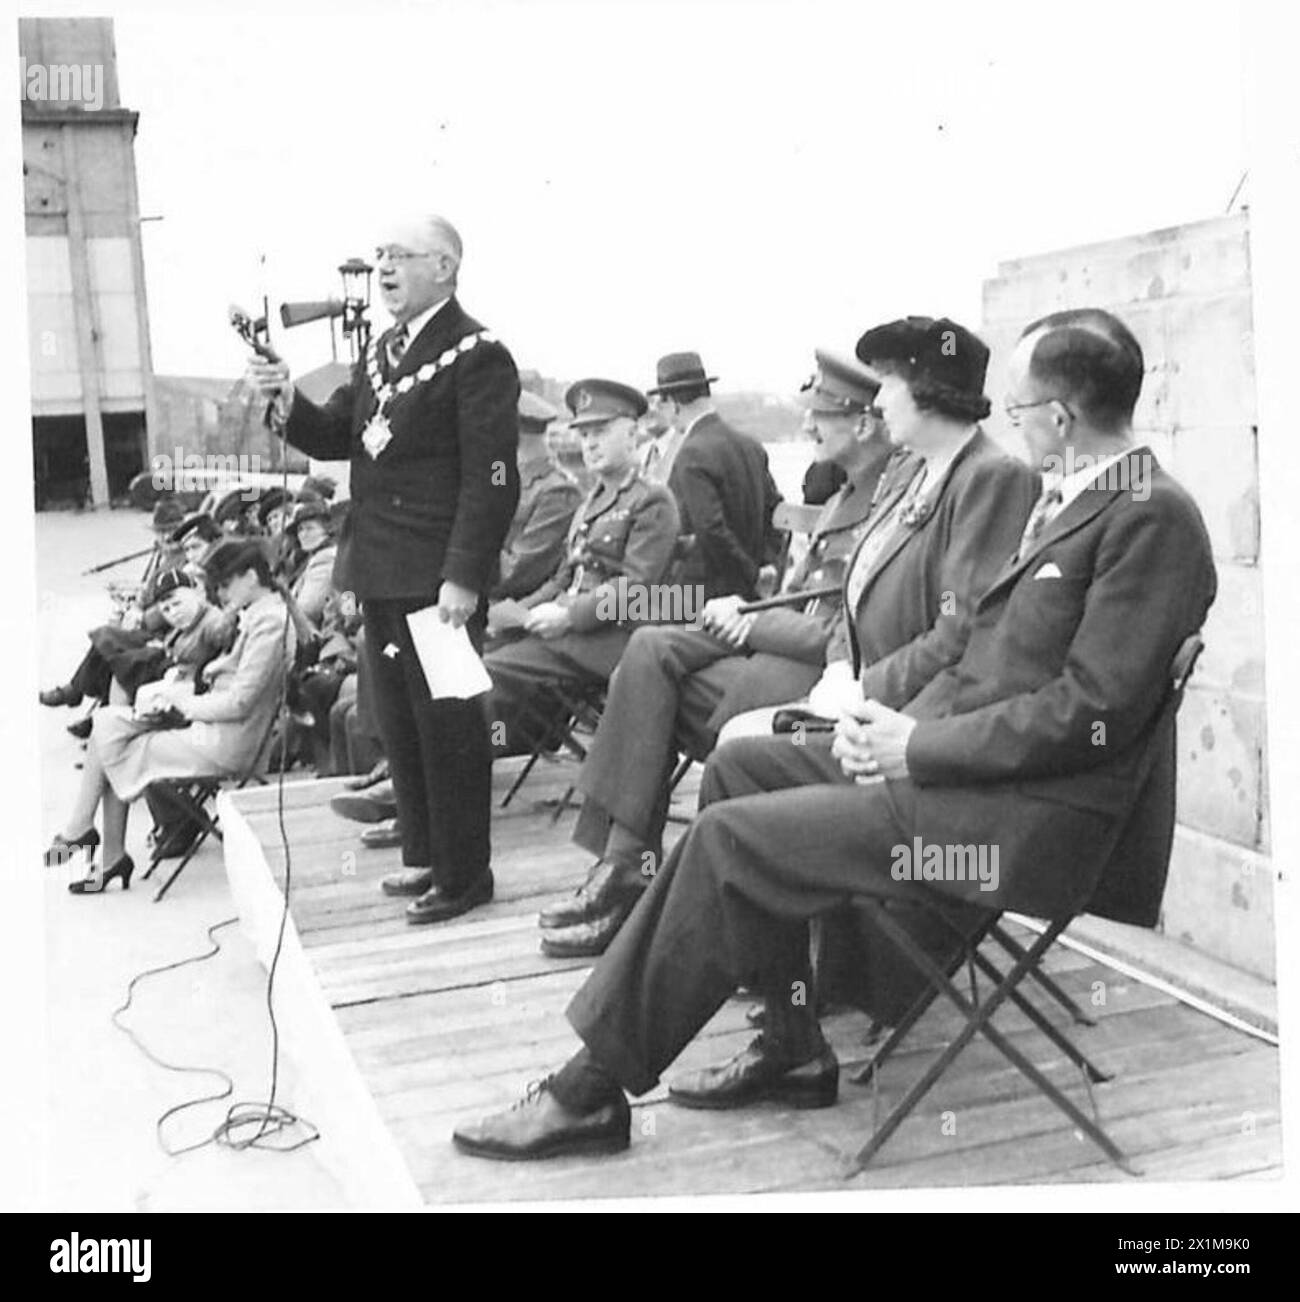 'SALUTE THE SOLDIER' WEEK AT ERITH - The Mayor of Erith - Councillor G.R.N.Farquhar addressing the assembly at the opening of Erith�s 'Salute the Soldier' week, British Army Stock Photo